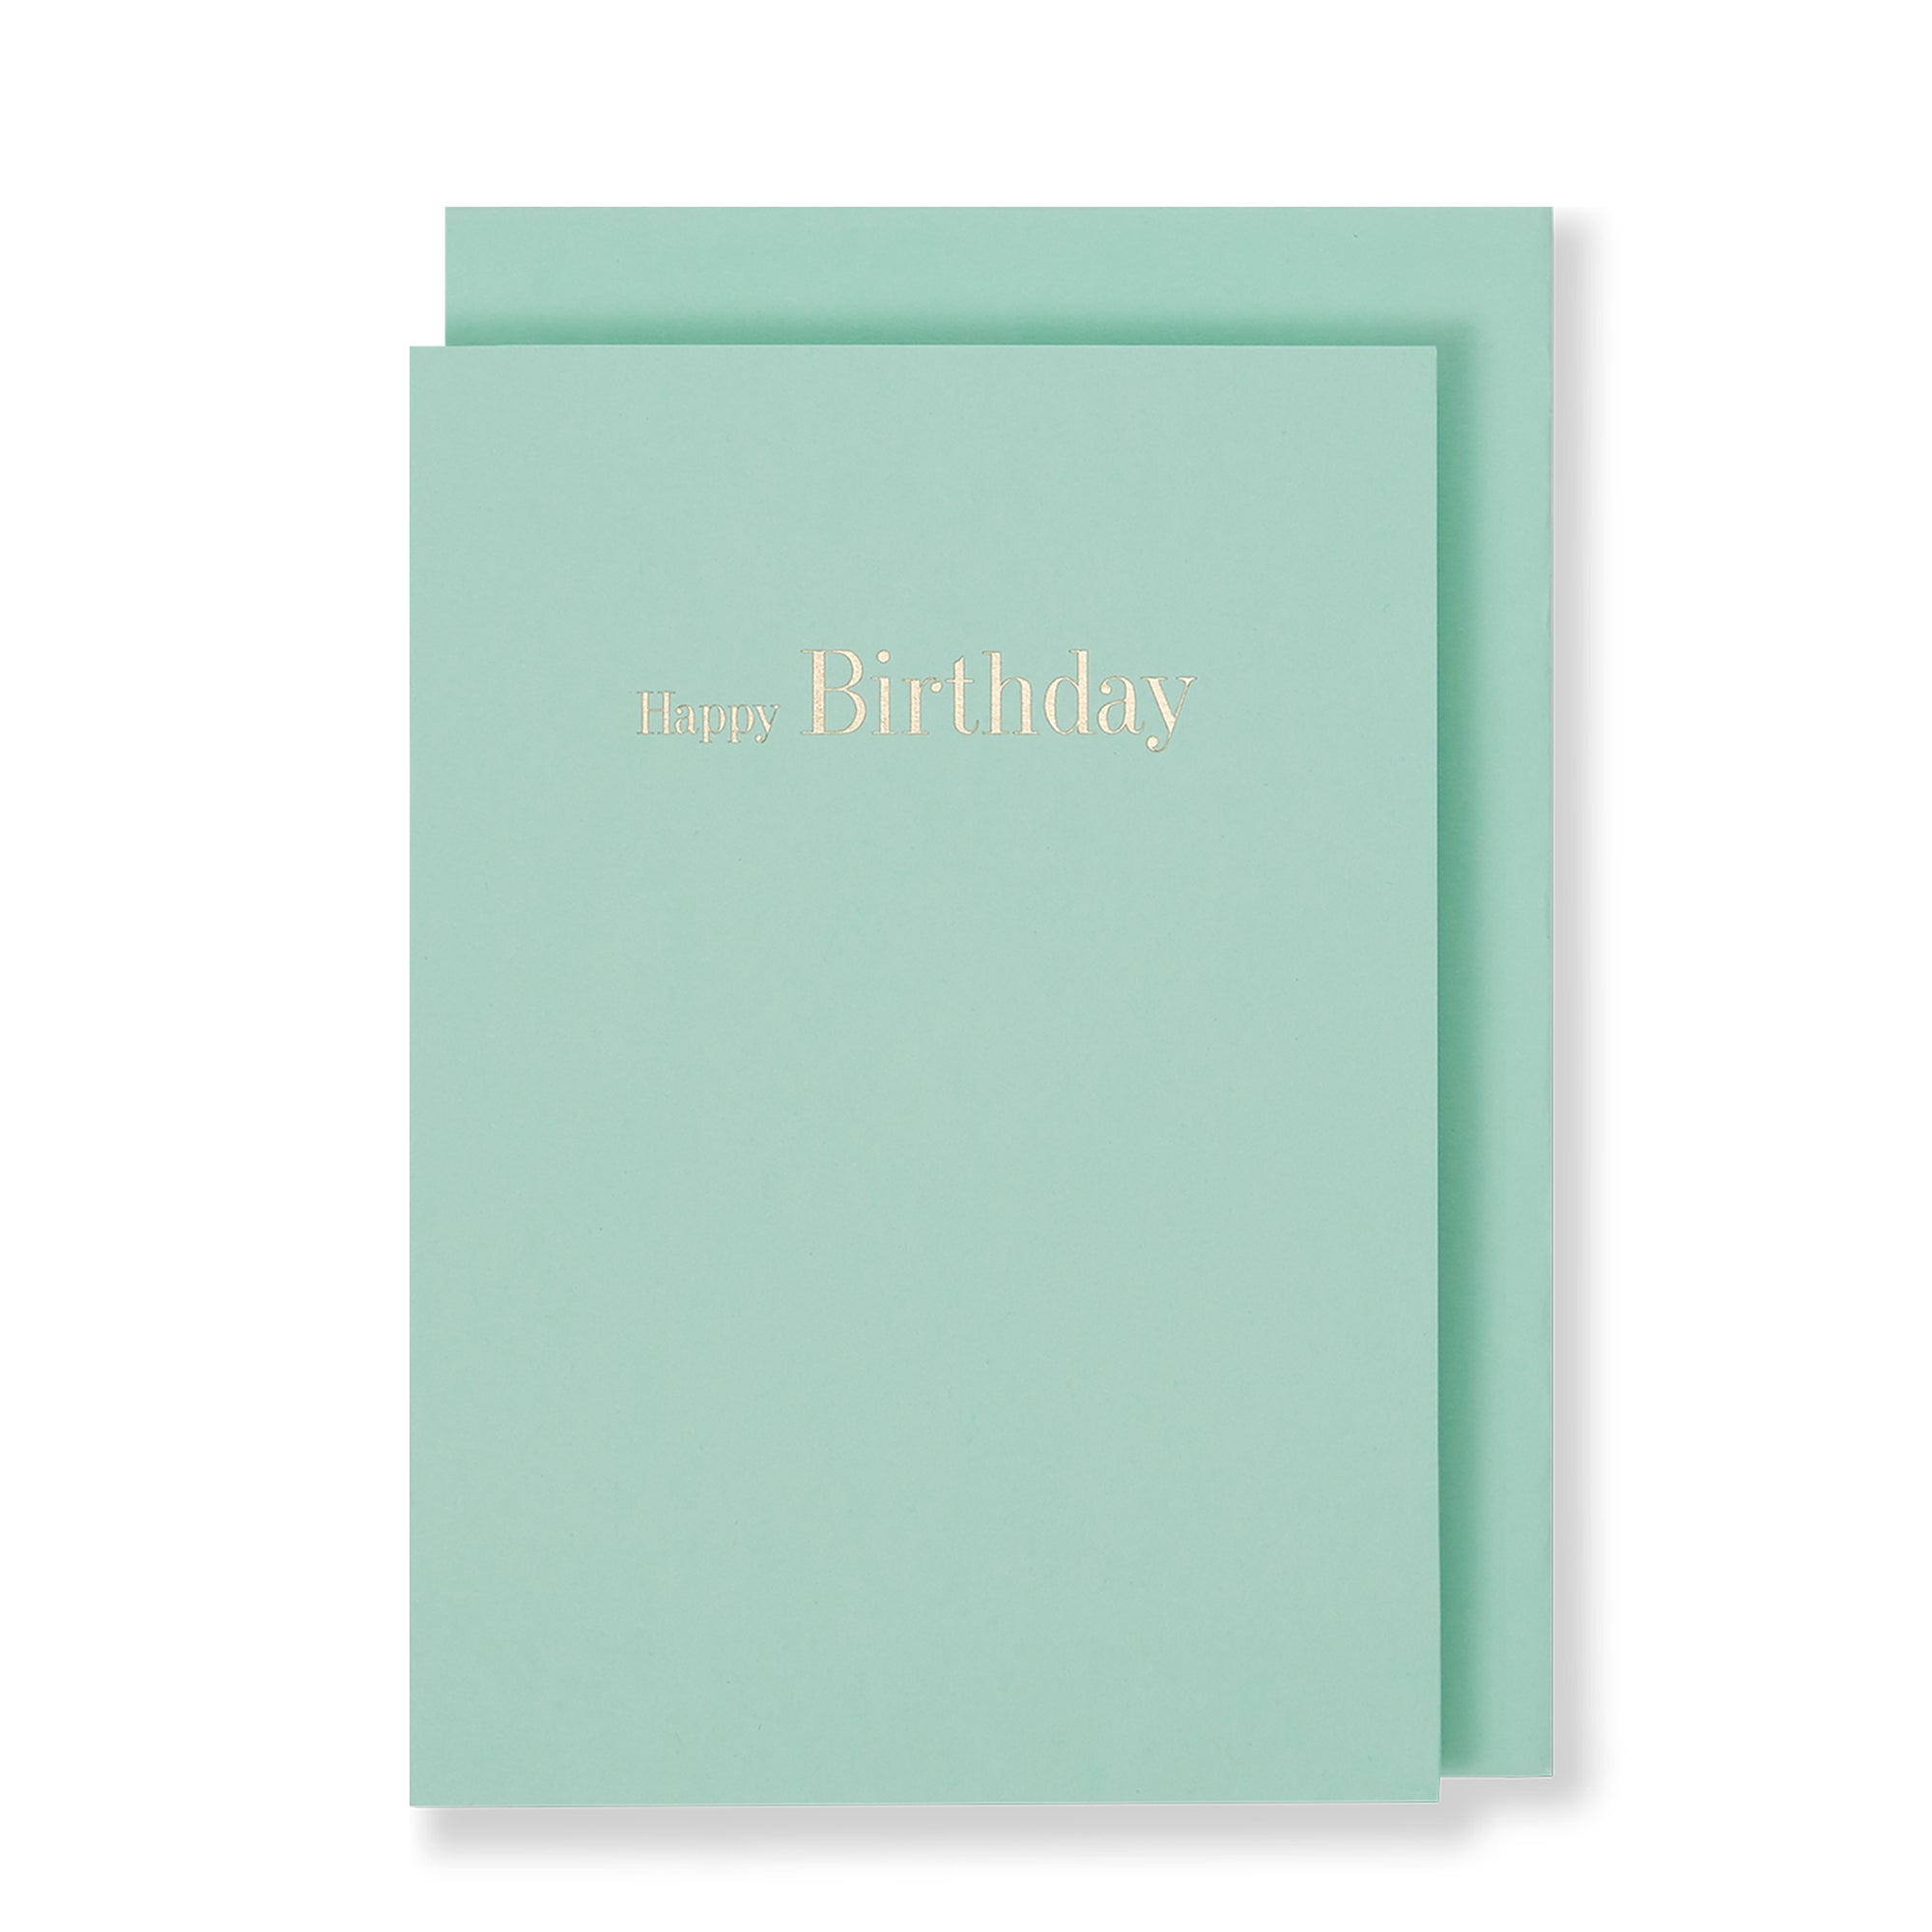 Happy Birthday Greeting Card in Green, Front